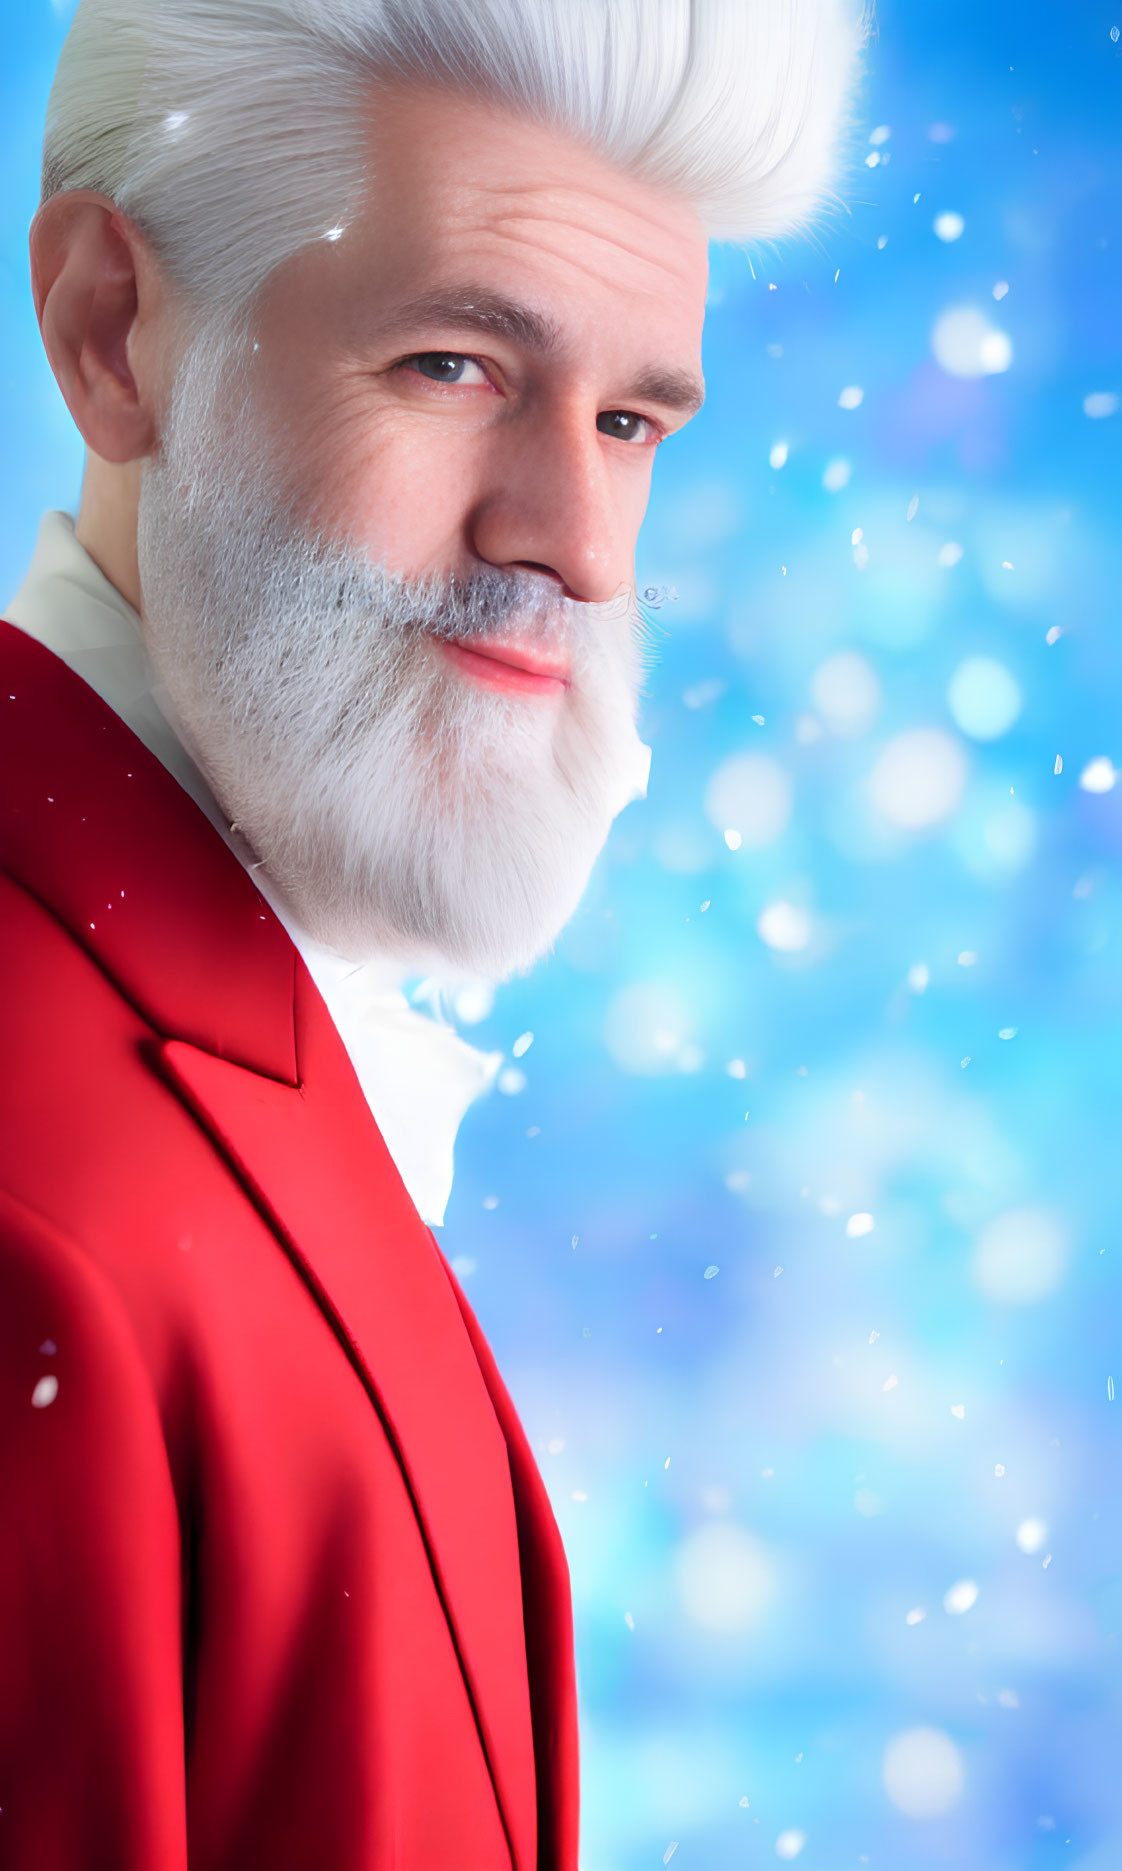 Smiling Santa Claus with white beard on blue background